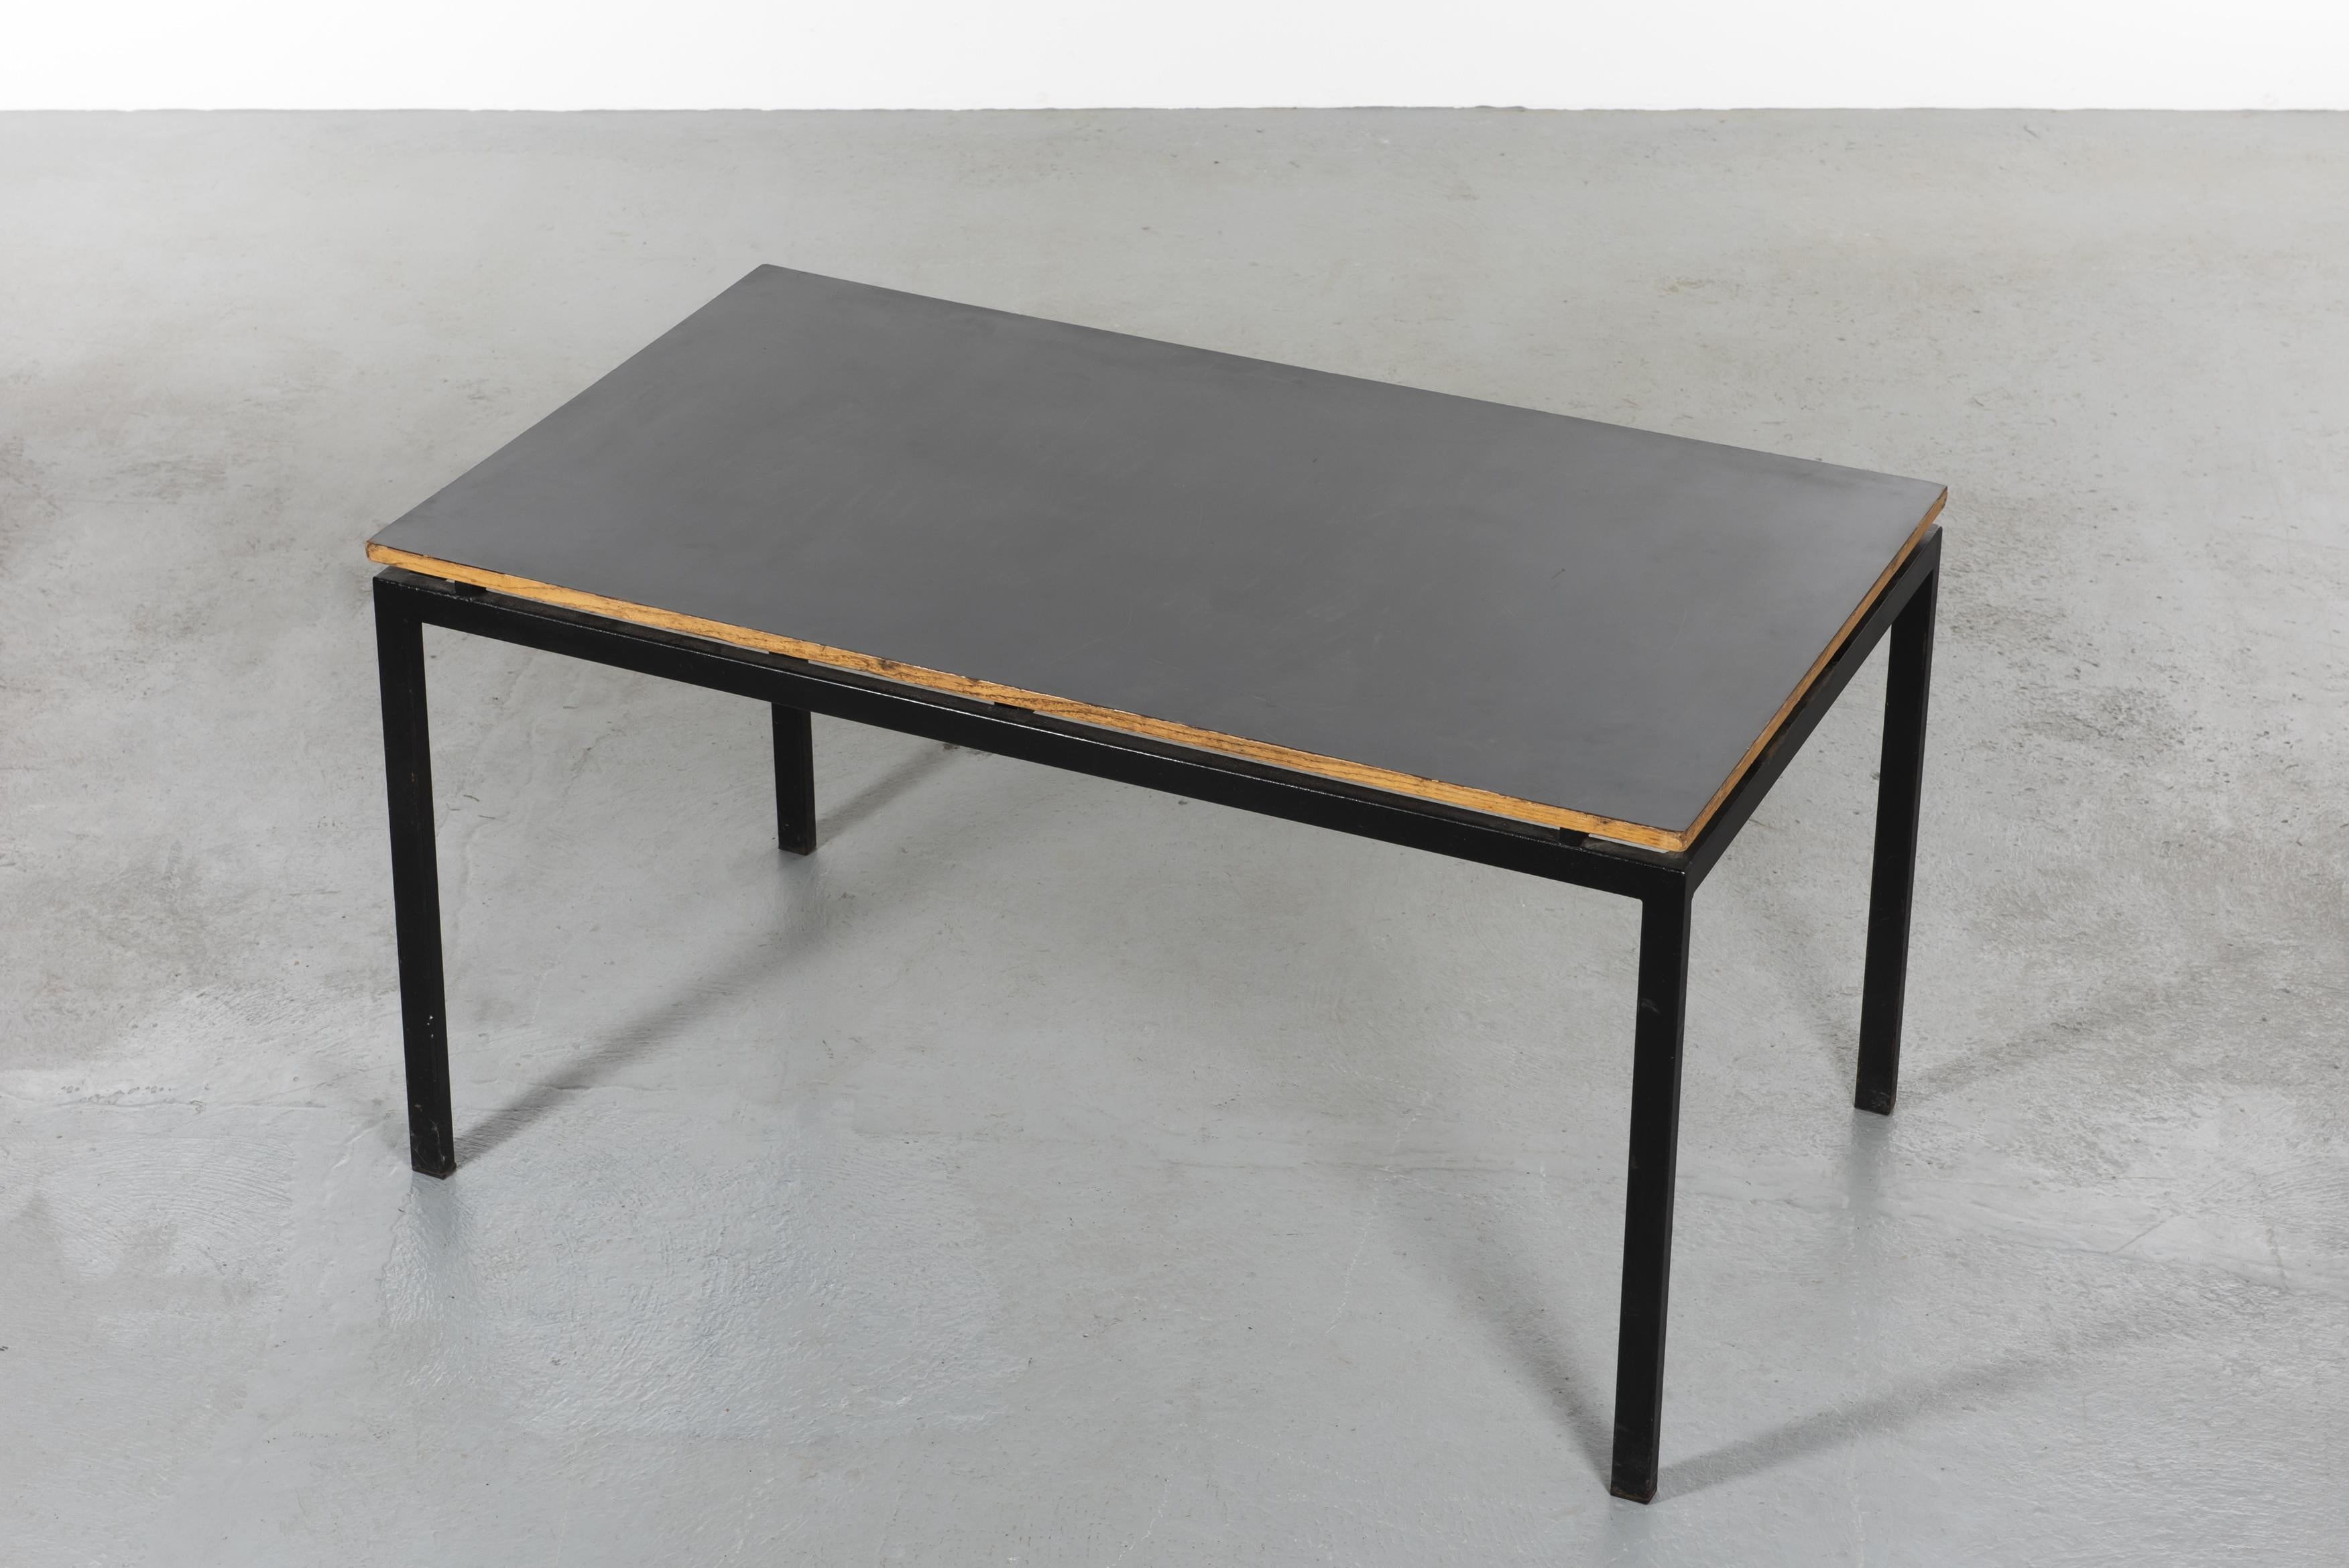 Charlotte Perriand (1903-1999)
Refectory table with a base in black lacquered metal and grey laminate plywood top. This table was made for the cafeteria of Miferma's engineers in the mining town of Cansado in Mauritania.

Measures: H 74 cm, L 140